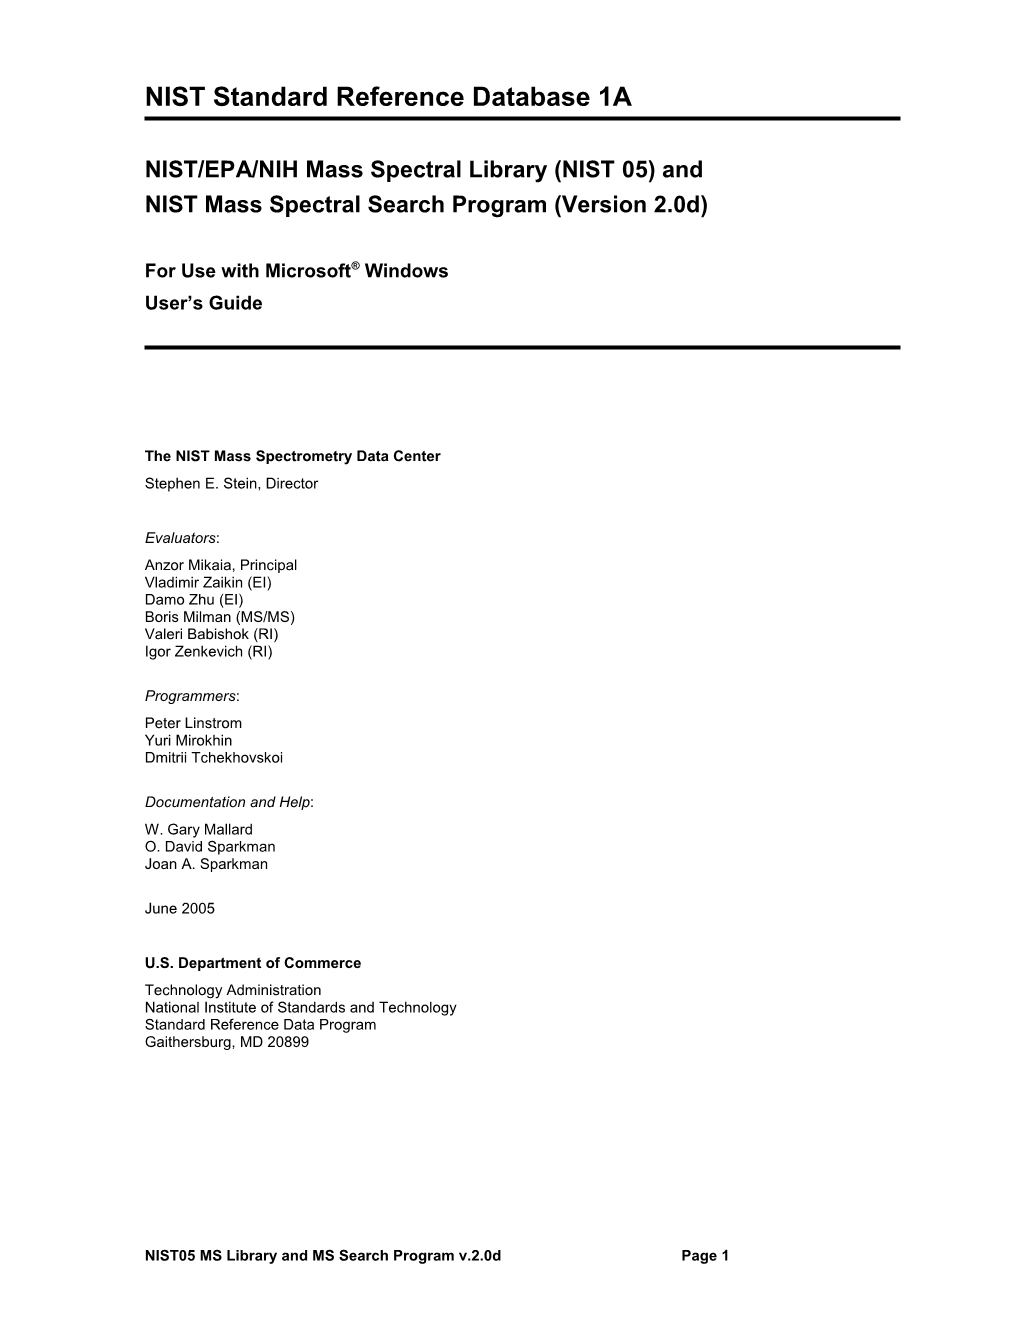 The NIST Mass Spectral (MS) Search Program for Windows, Version 2.0D